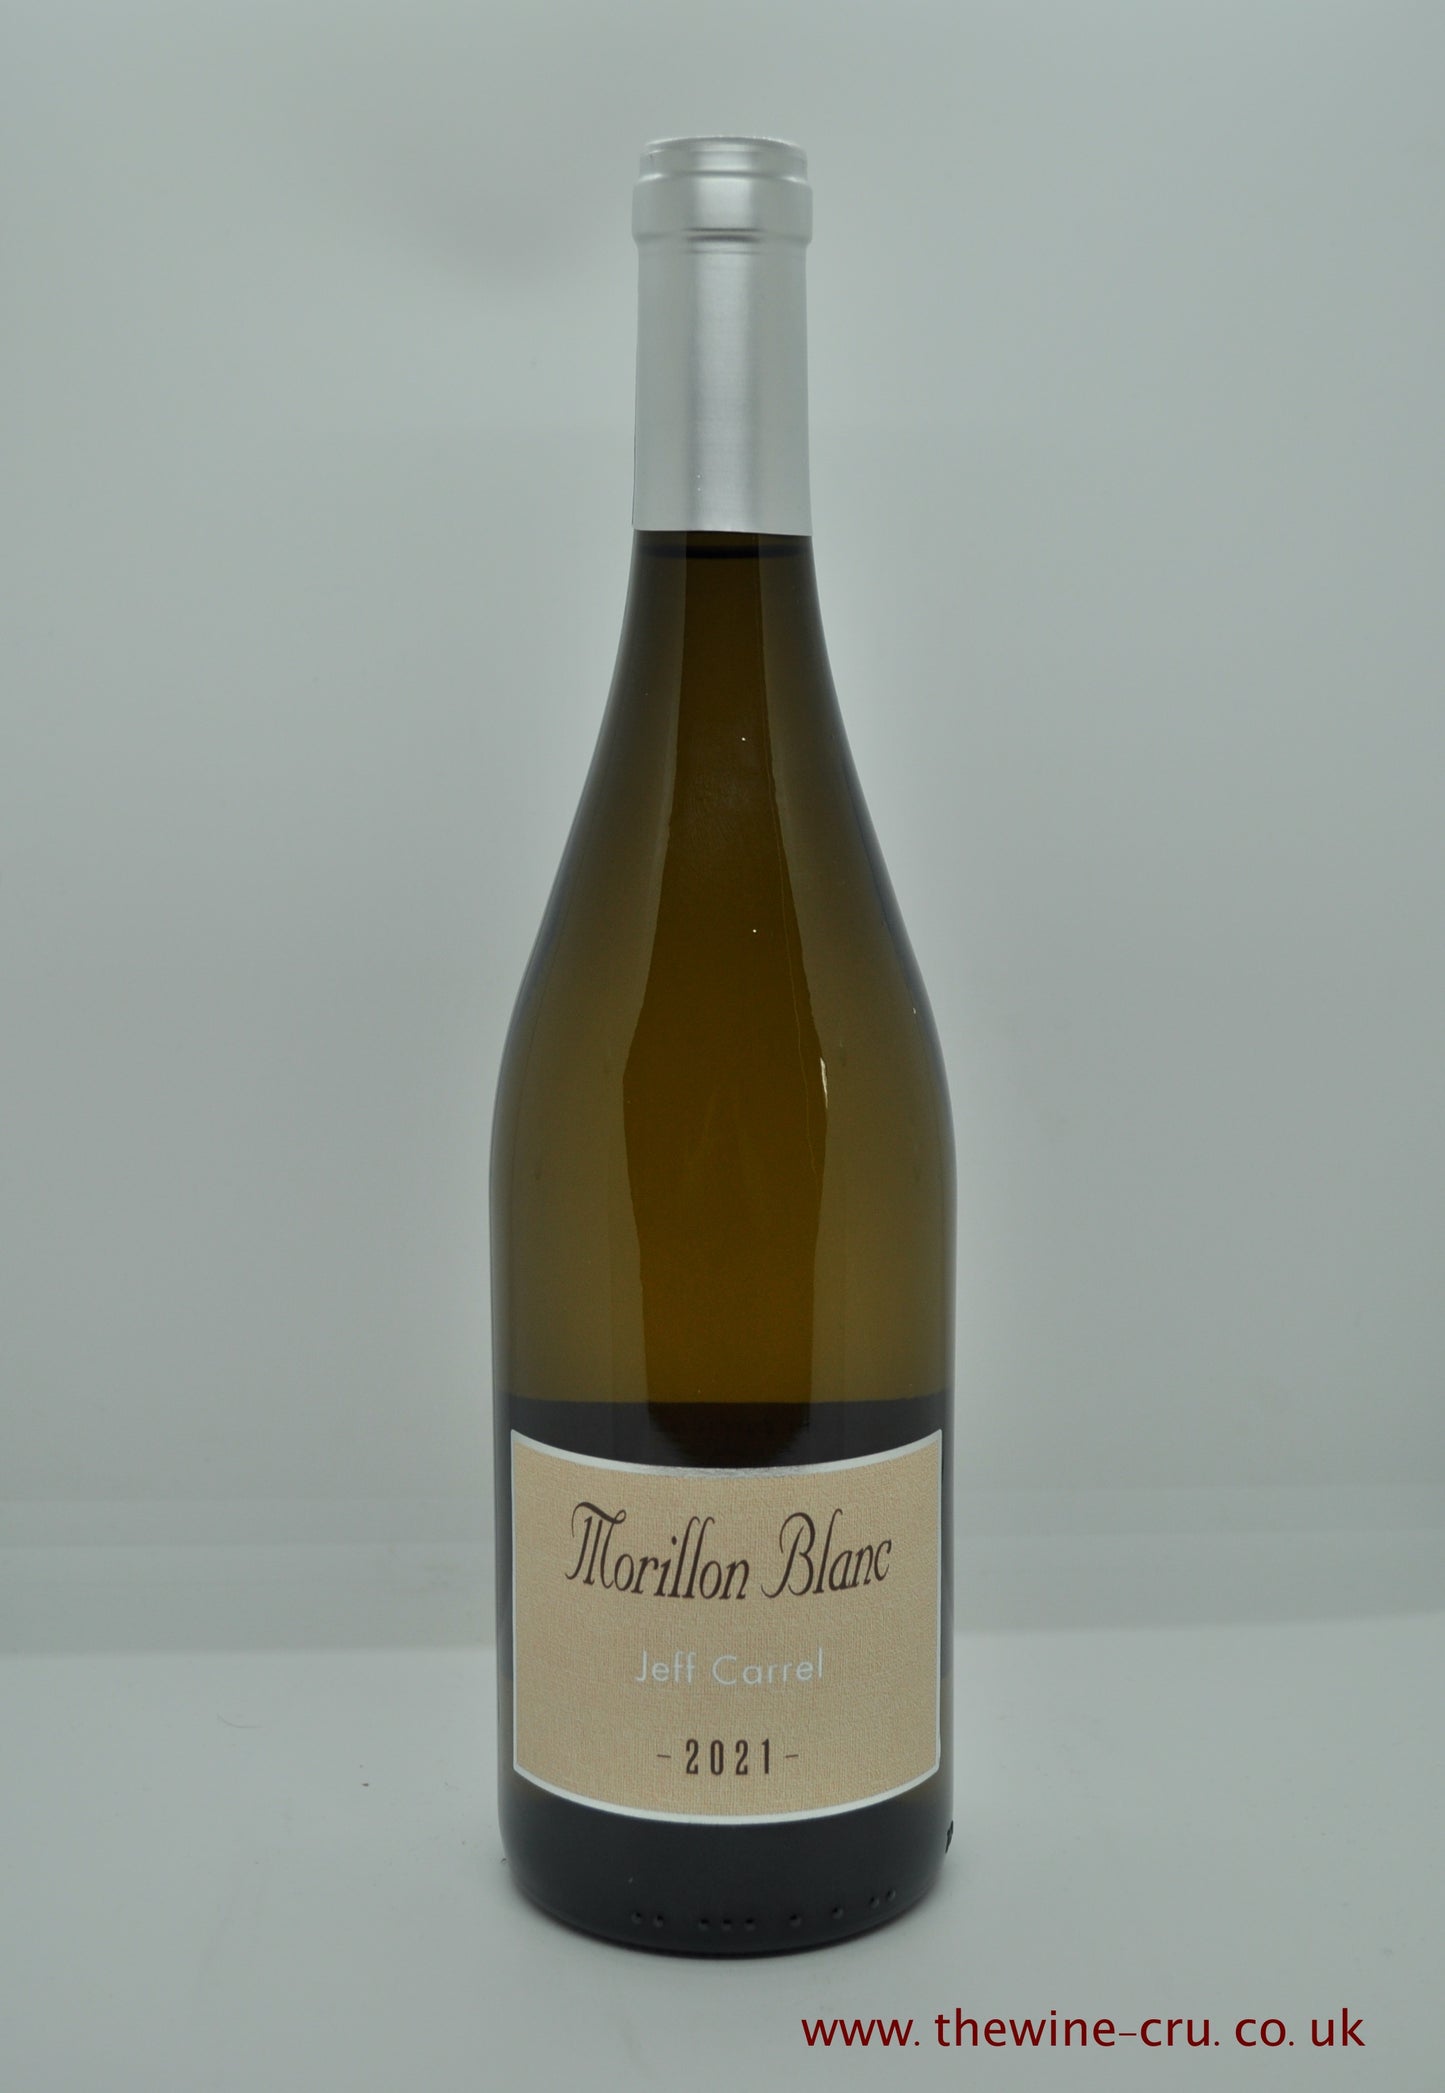 2021 vintage white wine. Morillon Blanc Jeff Carrel 2021. France. Immediate delivery. Free local delivery. Gift wrapping available.